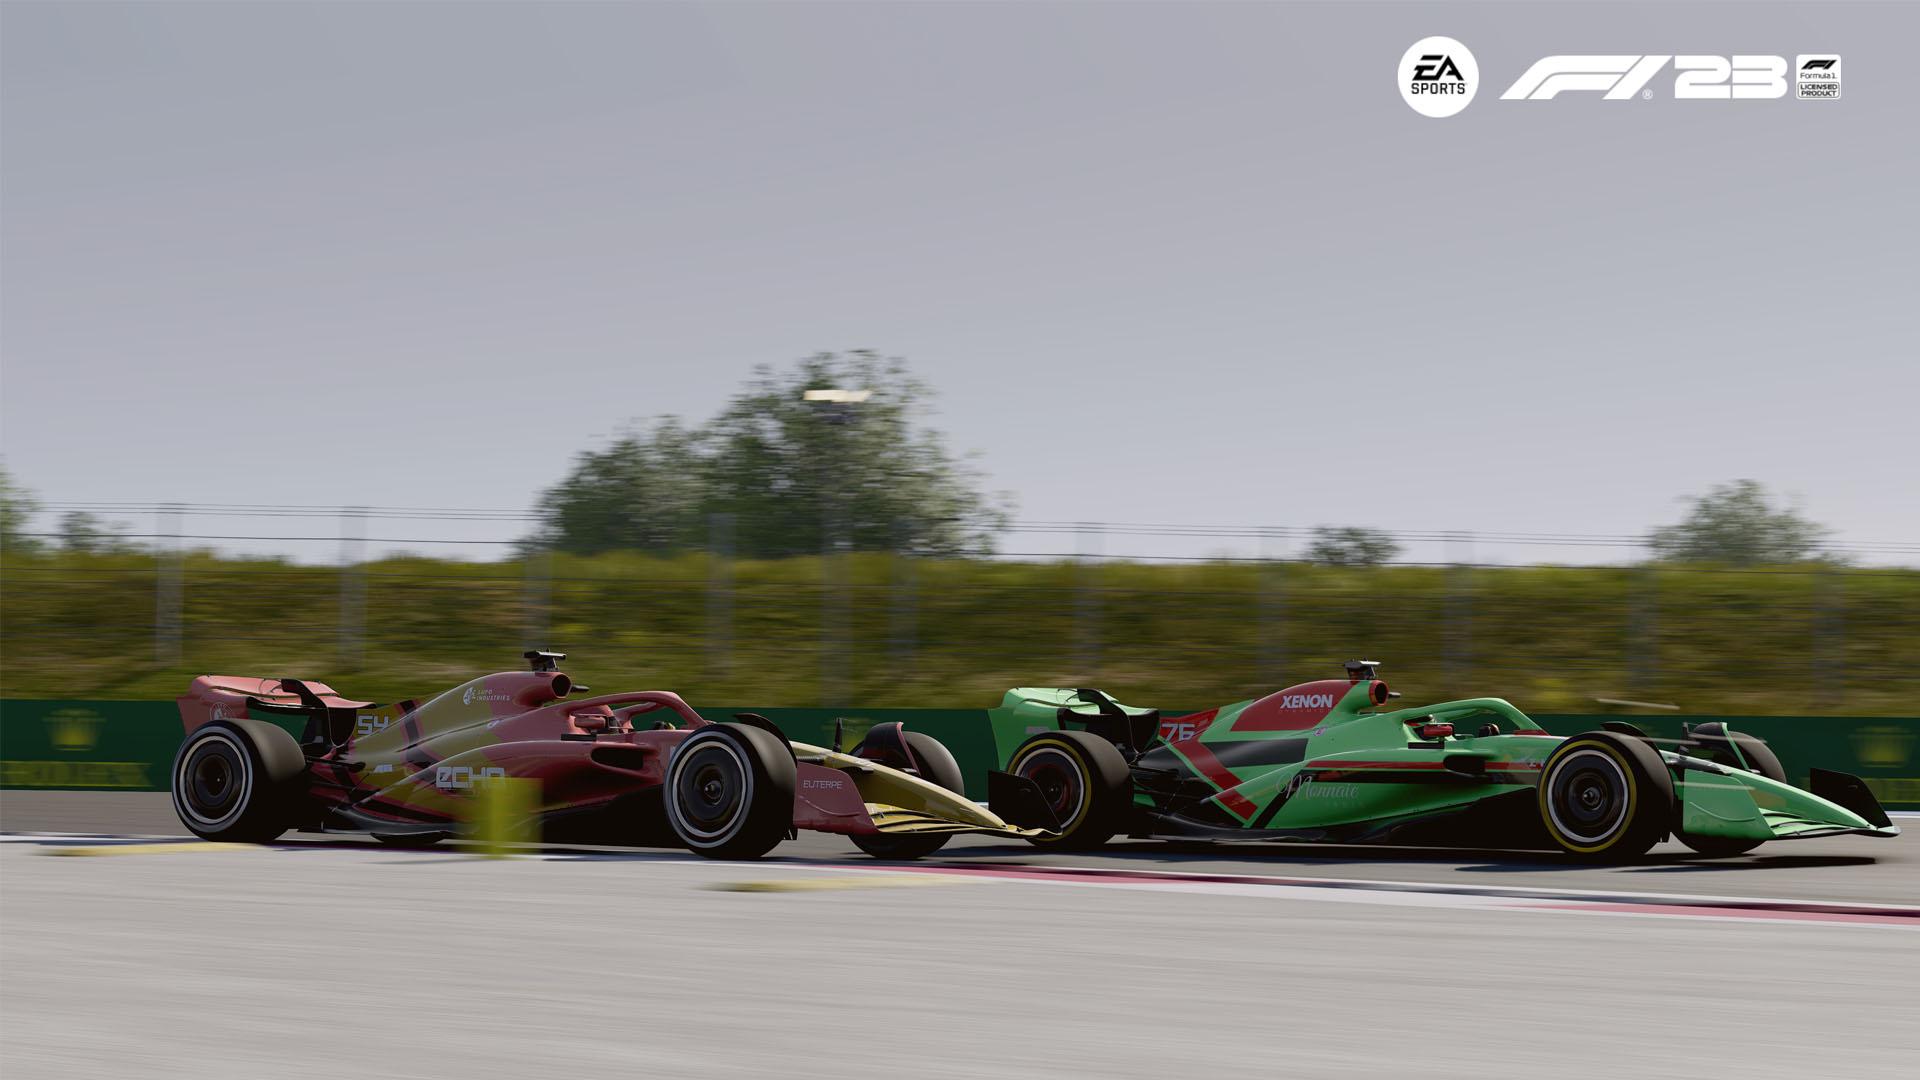 F1 23 vs F1 22: All changes and improvements